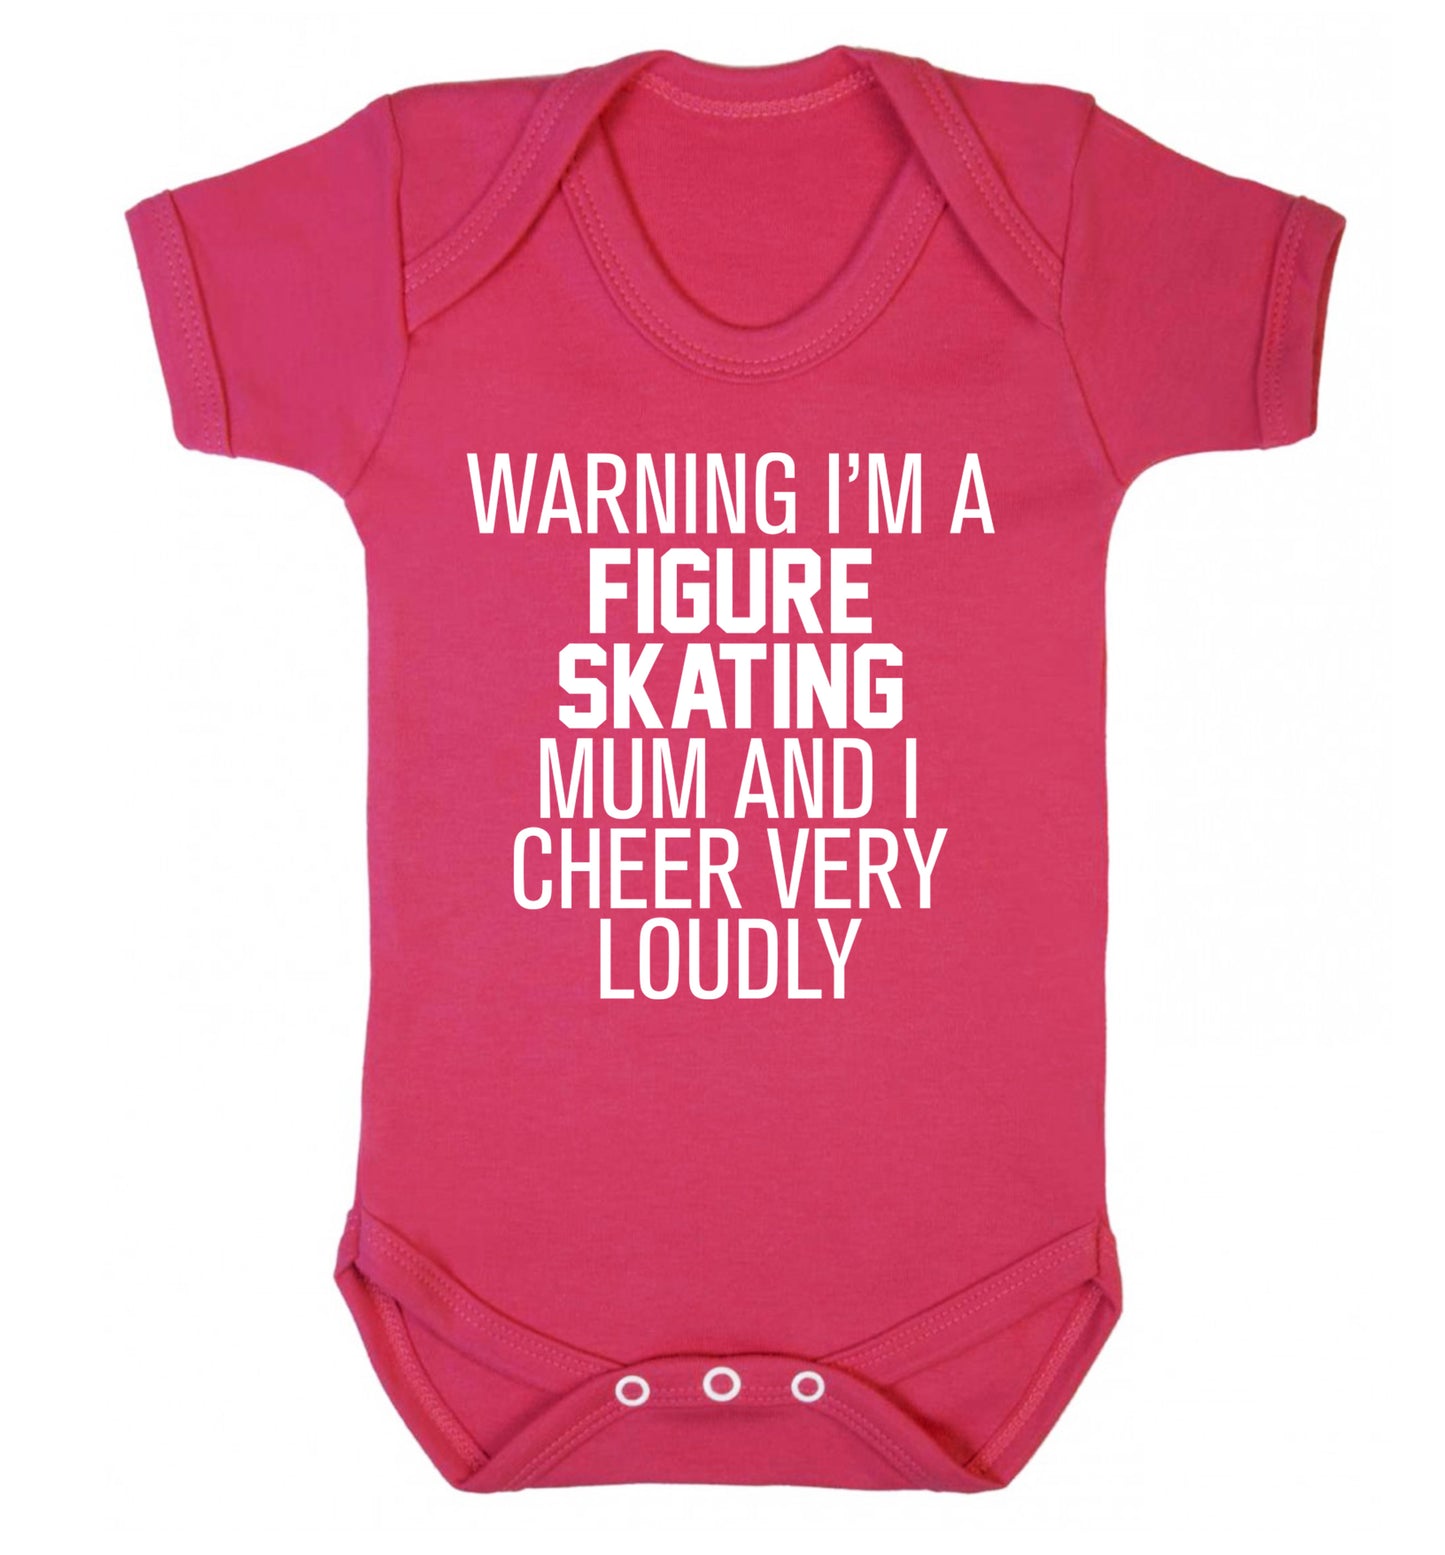 Warning I'm a figure skating mum and I cheer very loudly Baby Vest dark pink 18-24 months